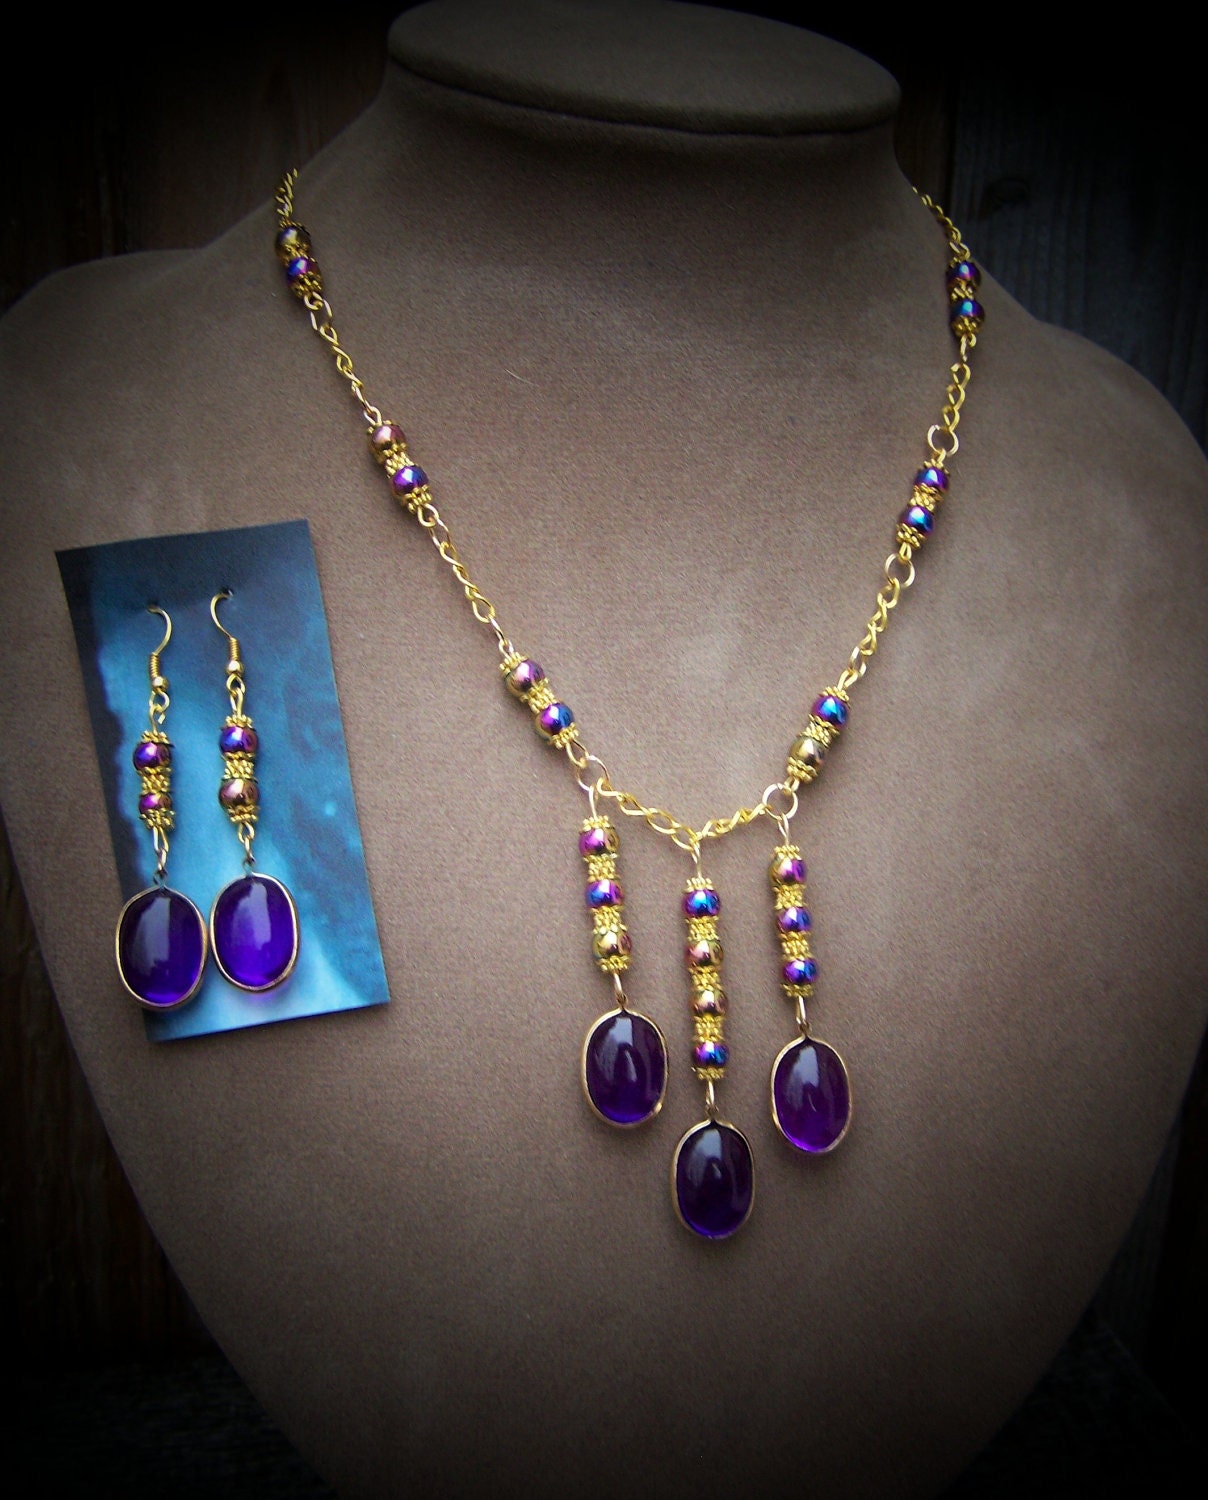 Free shipping with your mini order, Beautiful Goddess Beaded Necklace and Earrings Set by Sherry of 19th Day Miniatures